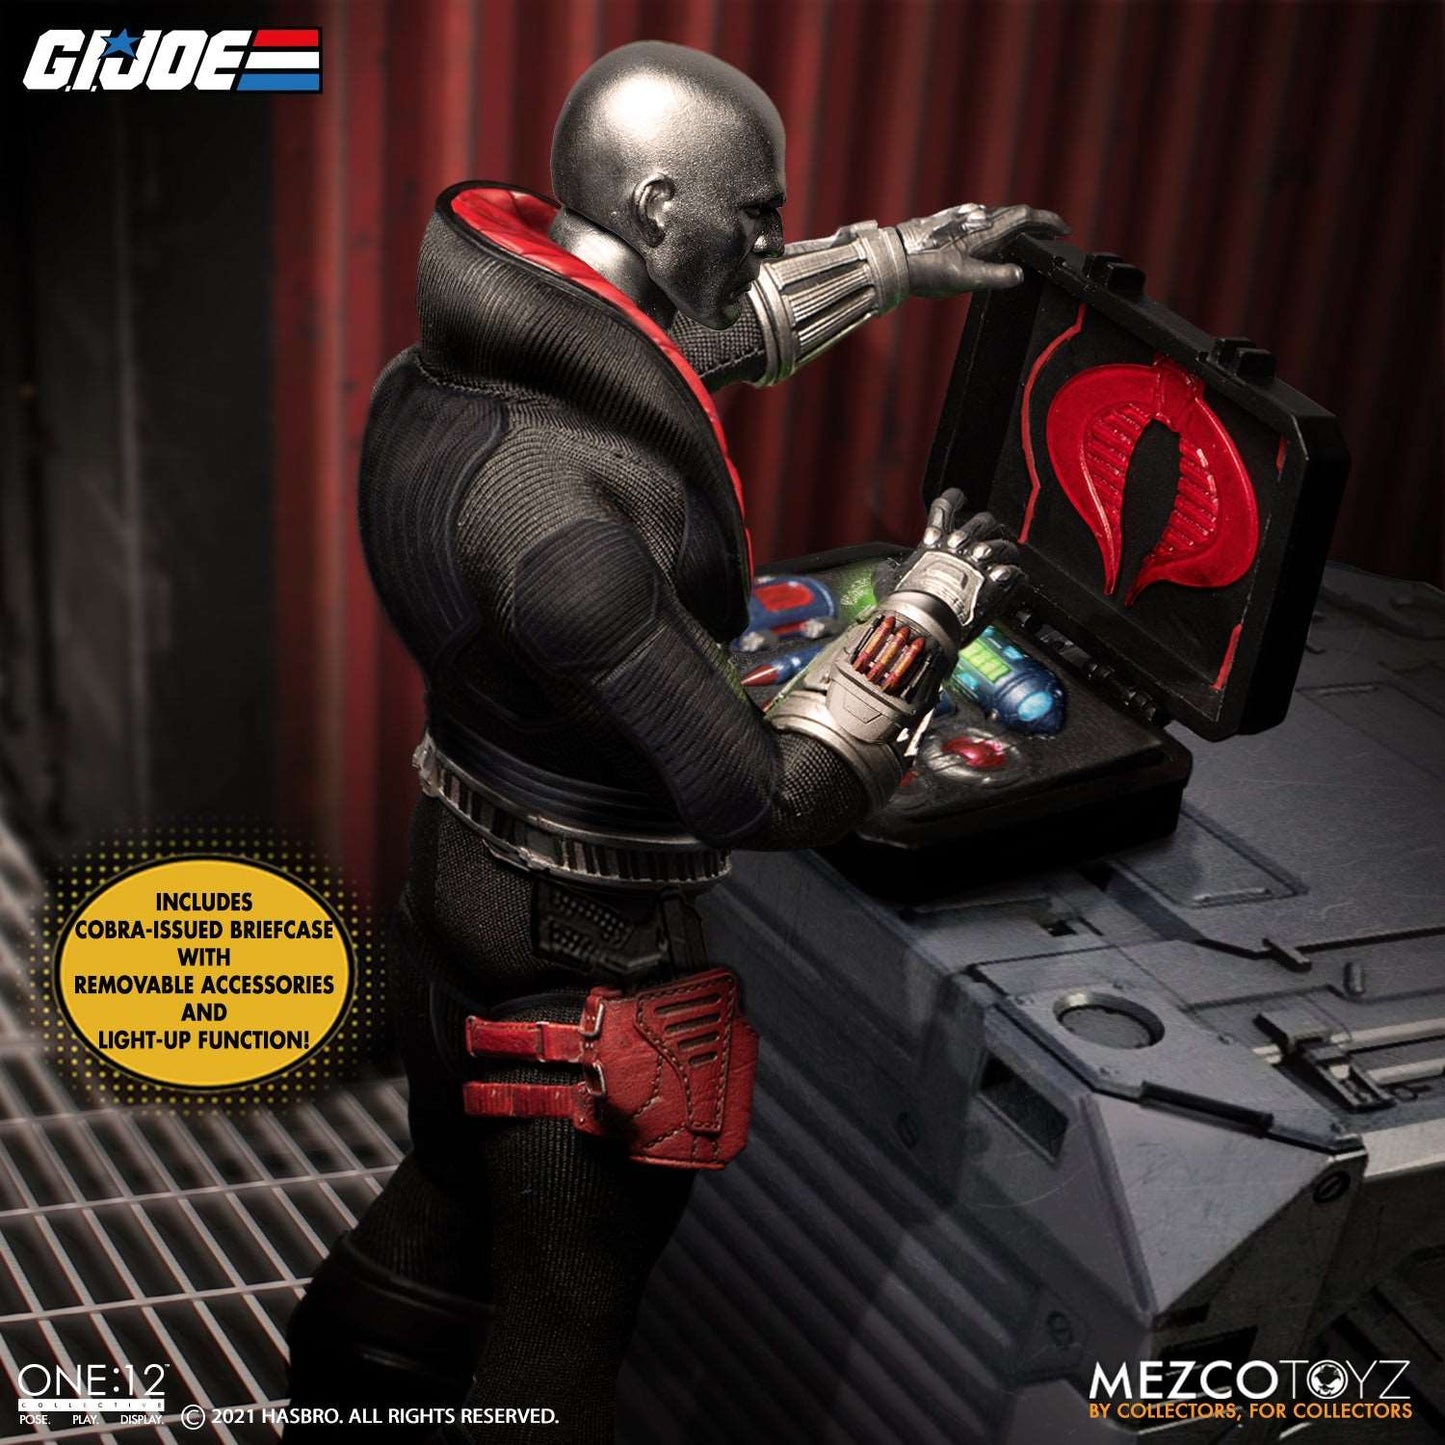 Mezco One:12 Collective G.I. Joe: Destro the ENEMY! Cobra issues briefcase with removable accessories and light-up function